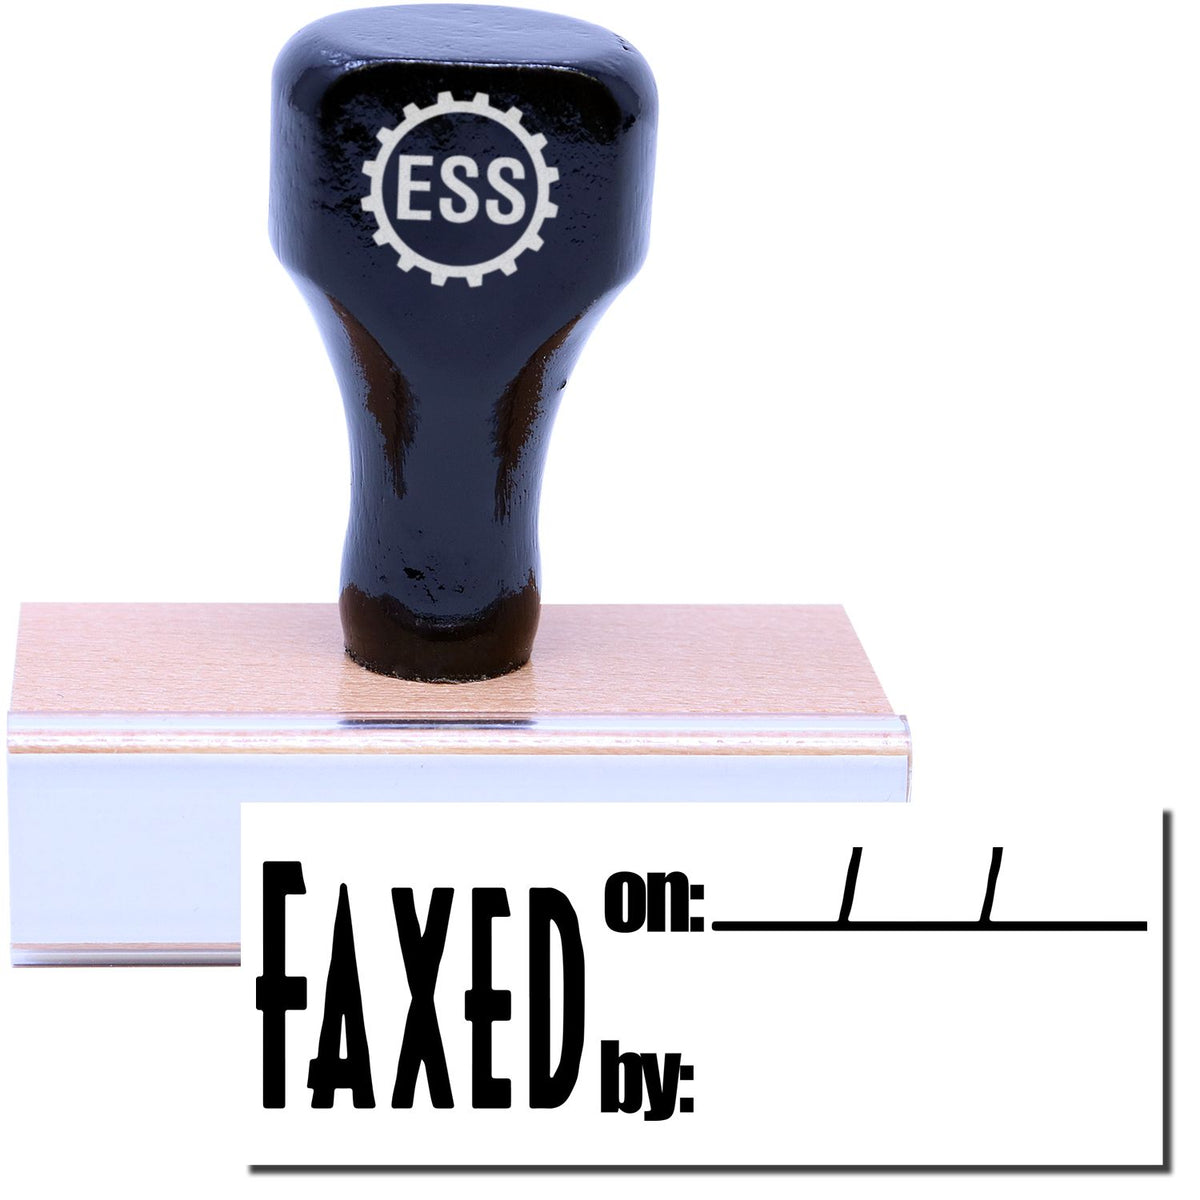 A stock office rubber stamp with a stamped image showing how the text &quot;FAXED on:&quot; in a large font with the space to write the date and name of the person (&quot;by:&quot;) is displayed after stamping.